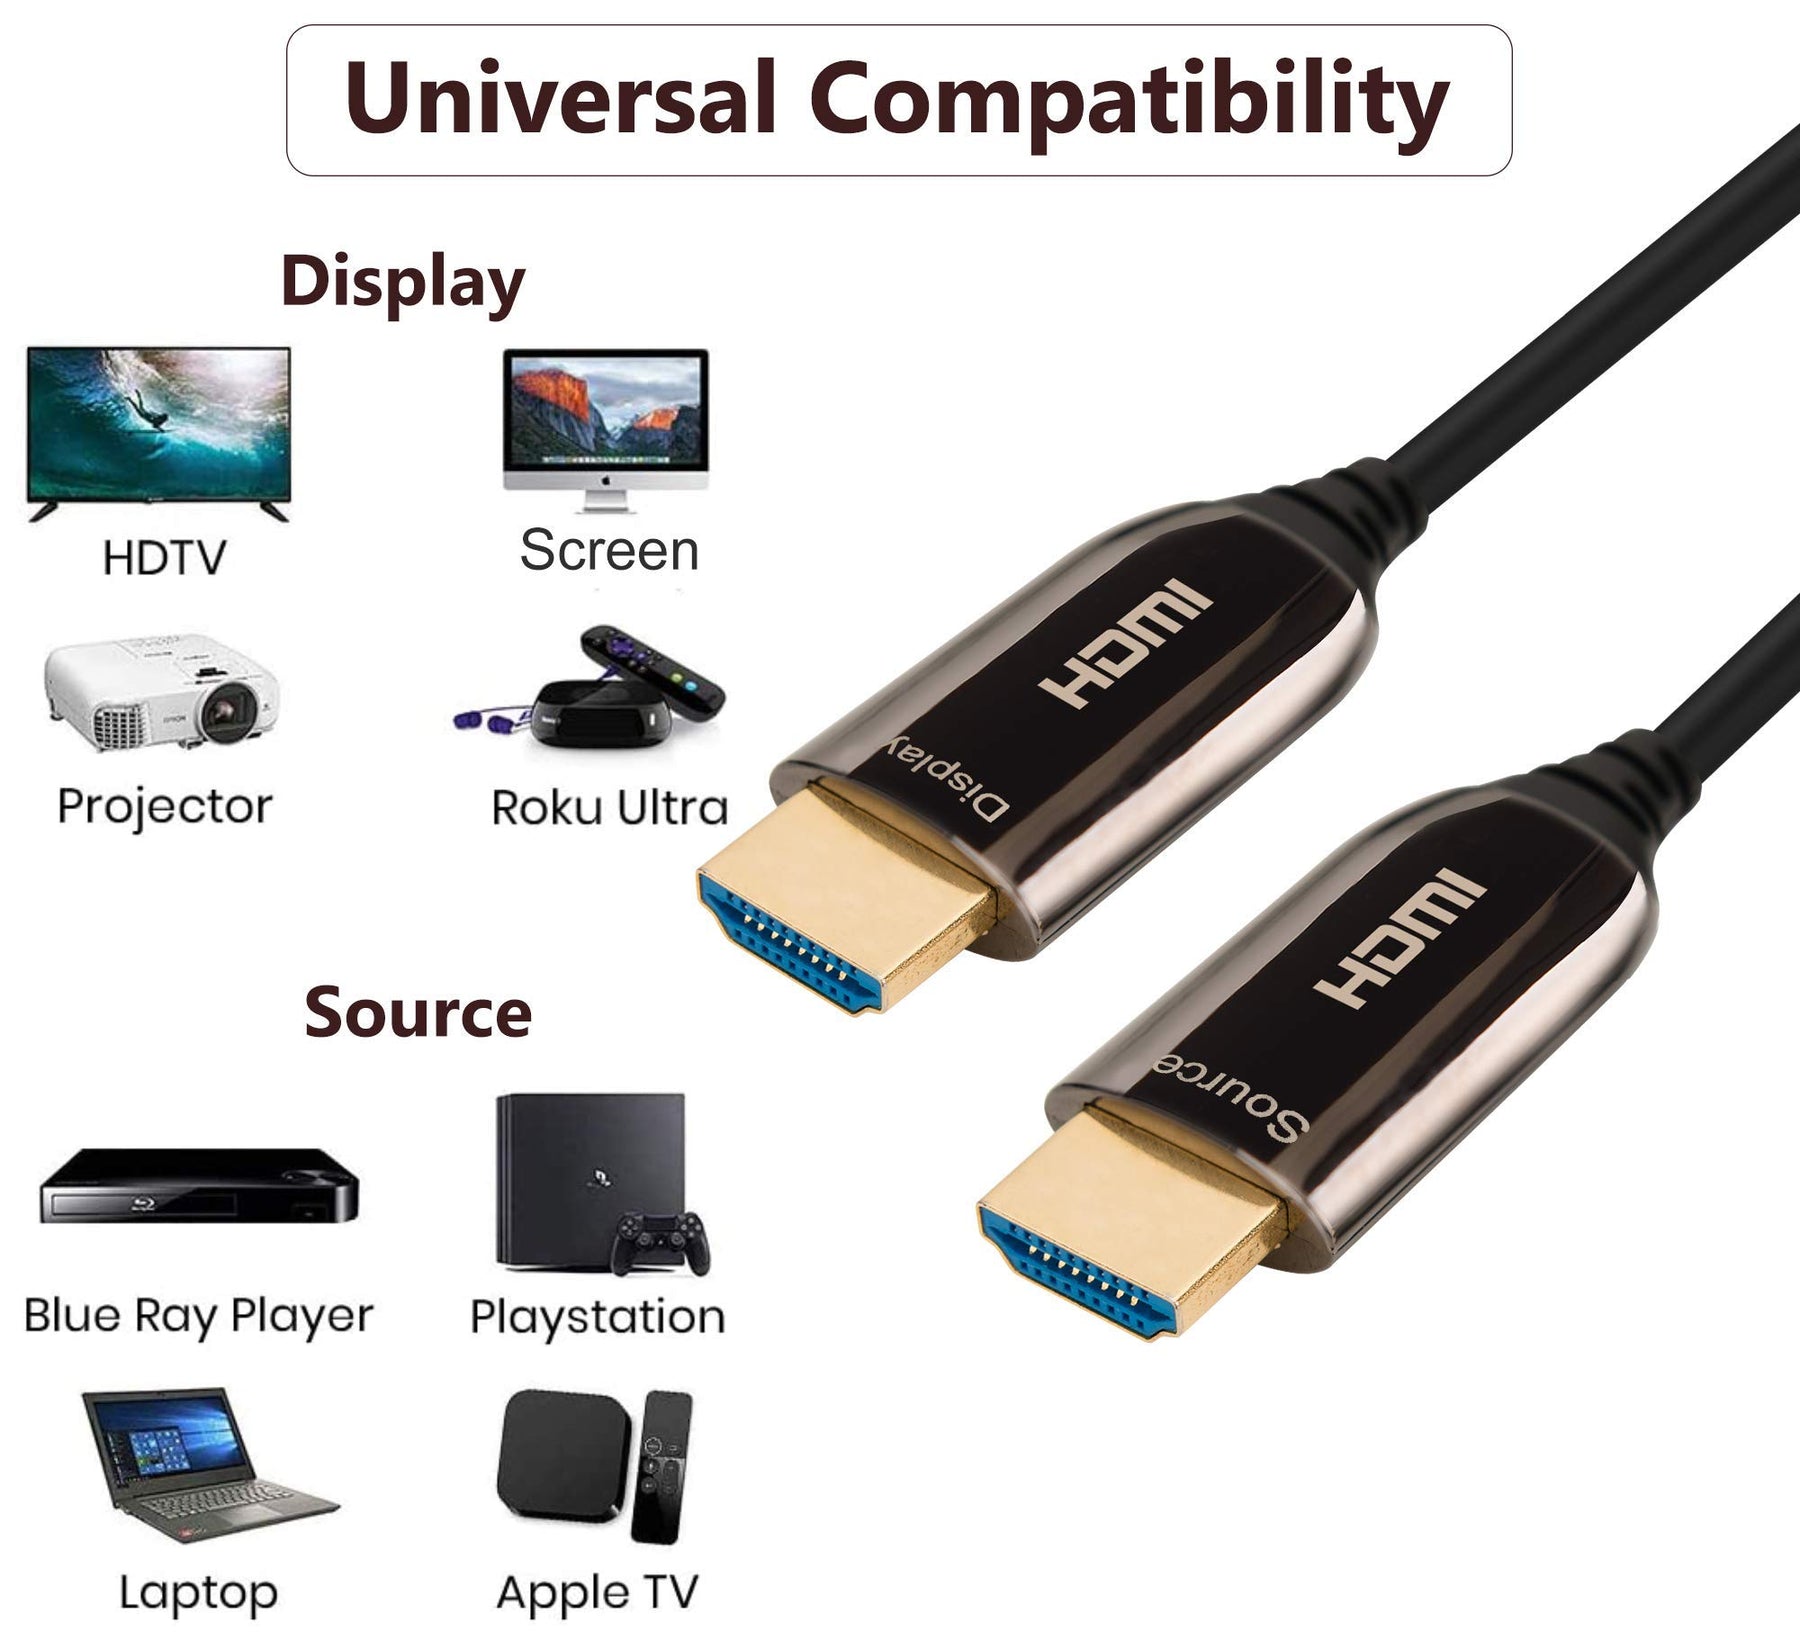 HDMI 8K fiber optic cable HDMI 15M cable Ultra high speed cable 48 Gbps 2.1 Support for 8K cable at 60 Hz, 4K at 120 Hz, 4320p, 4: 4: 4, HDR10 +, HDCP 2.2, 3D, PS4, PS3 - IBRA